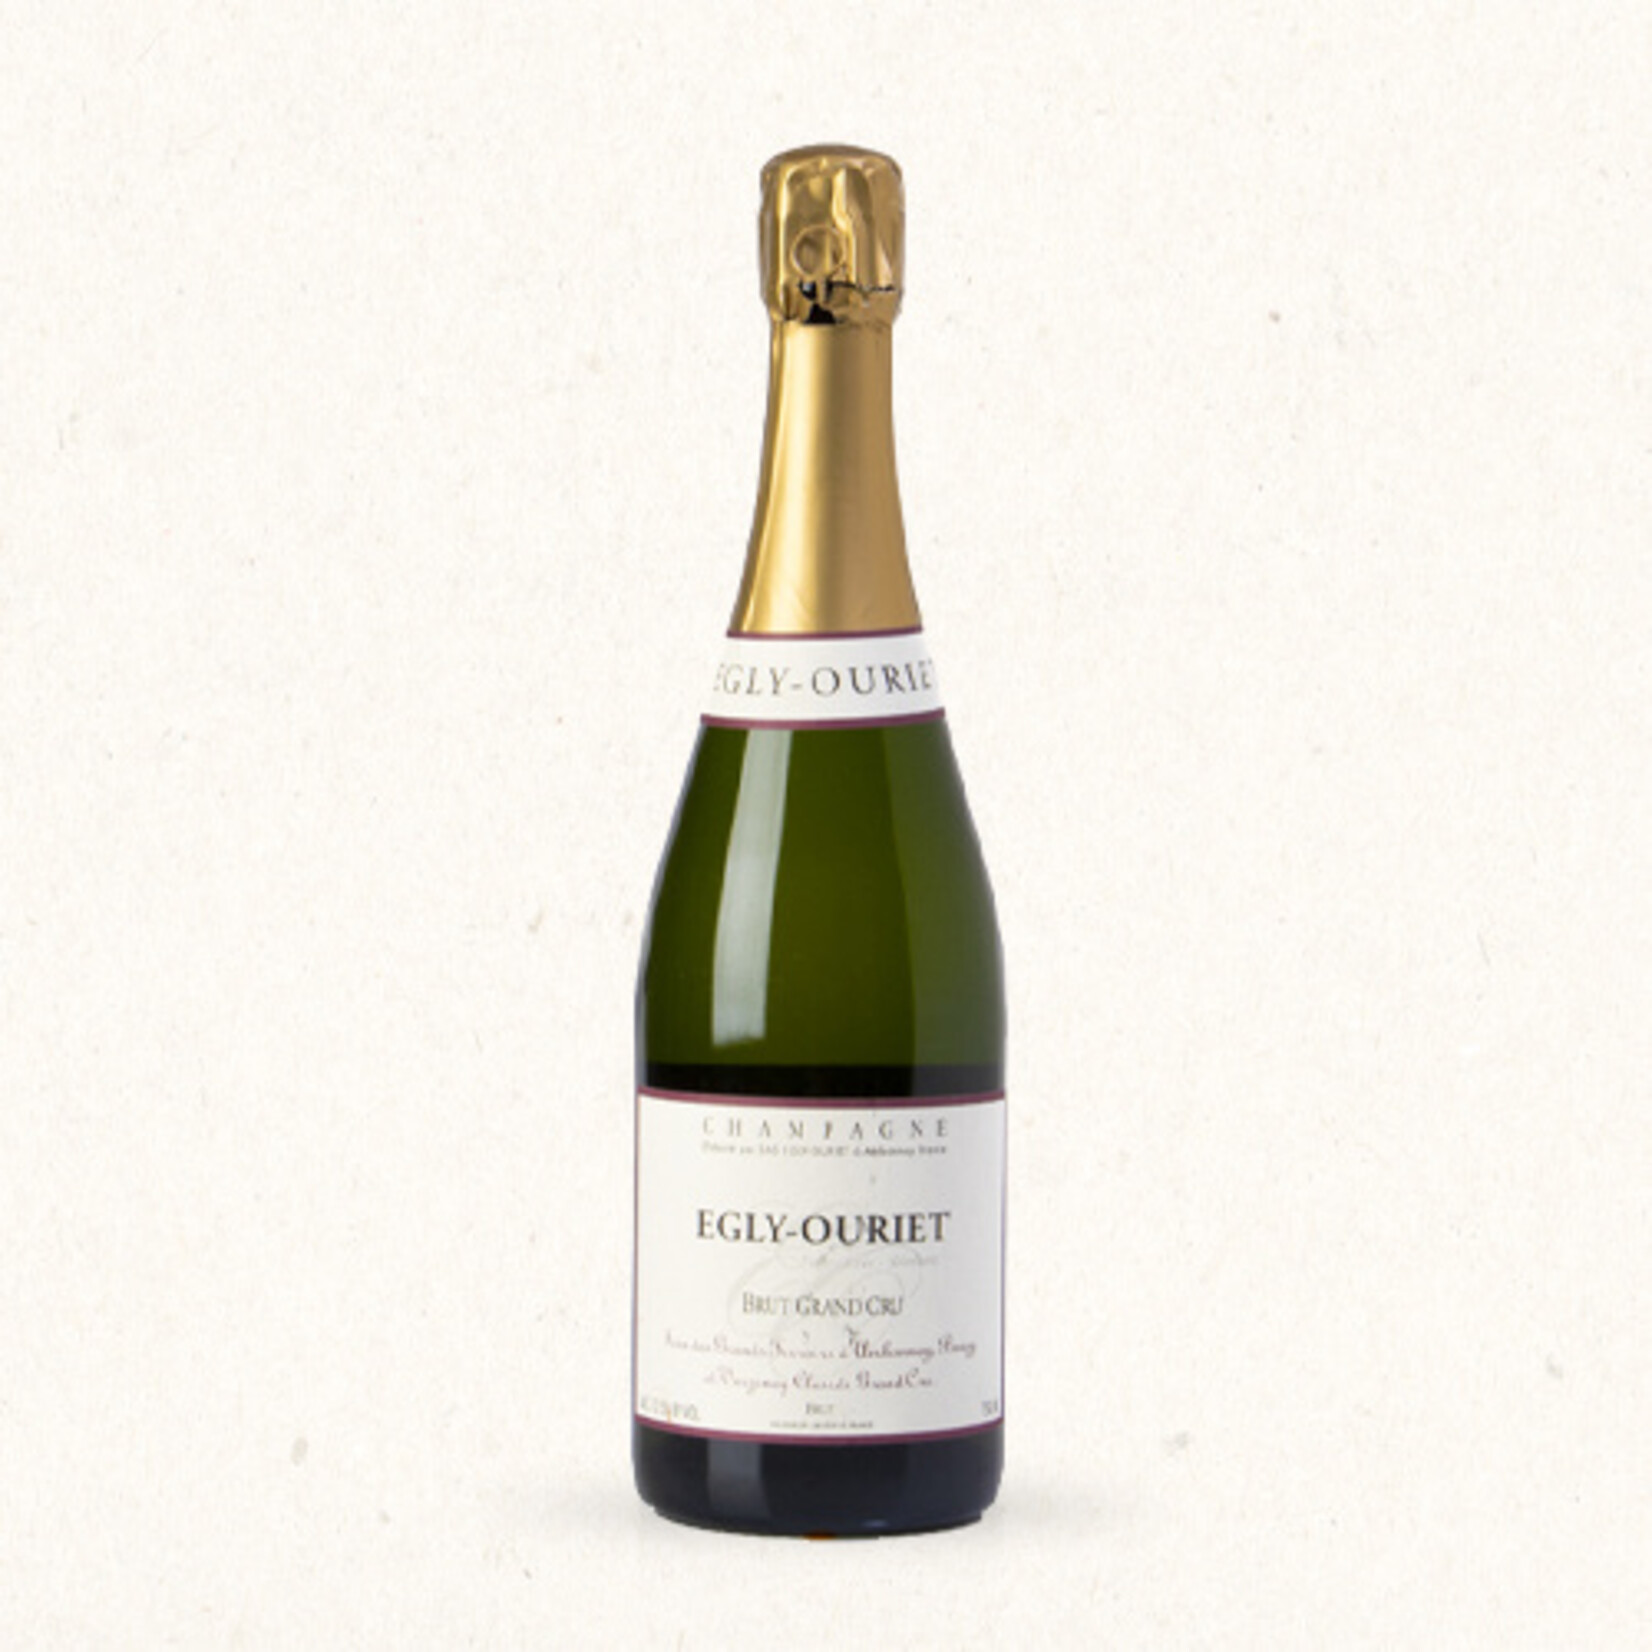 Egly-Ouriet Tradition grand cru - extra brut (september 2022)